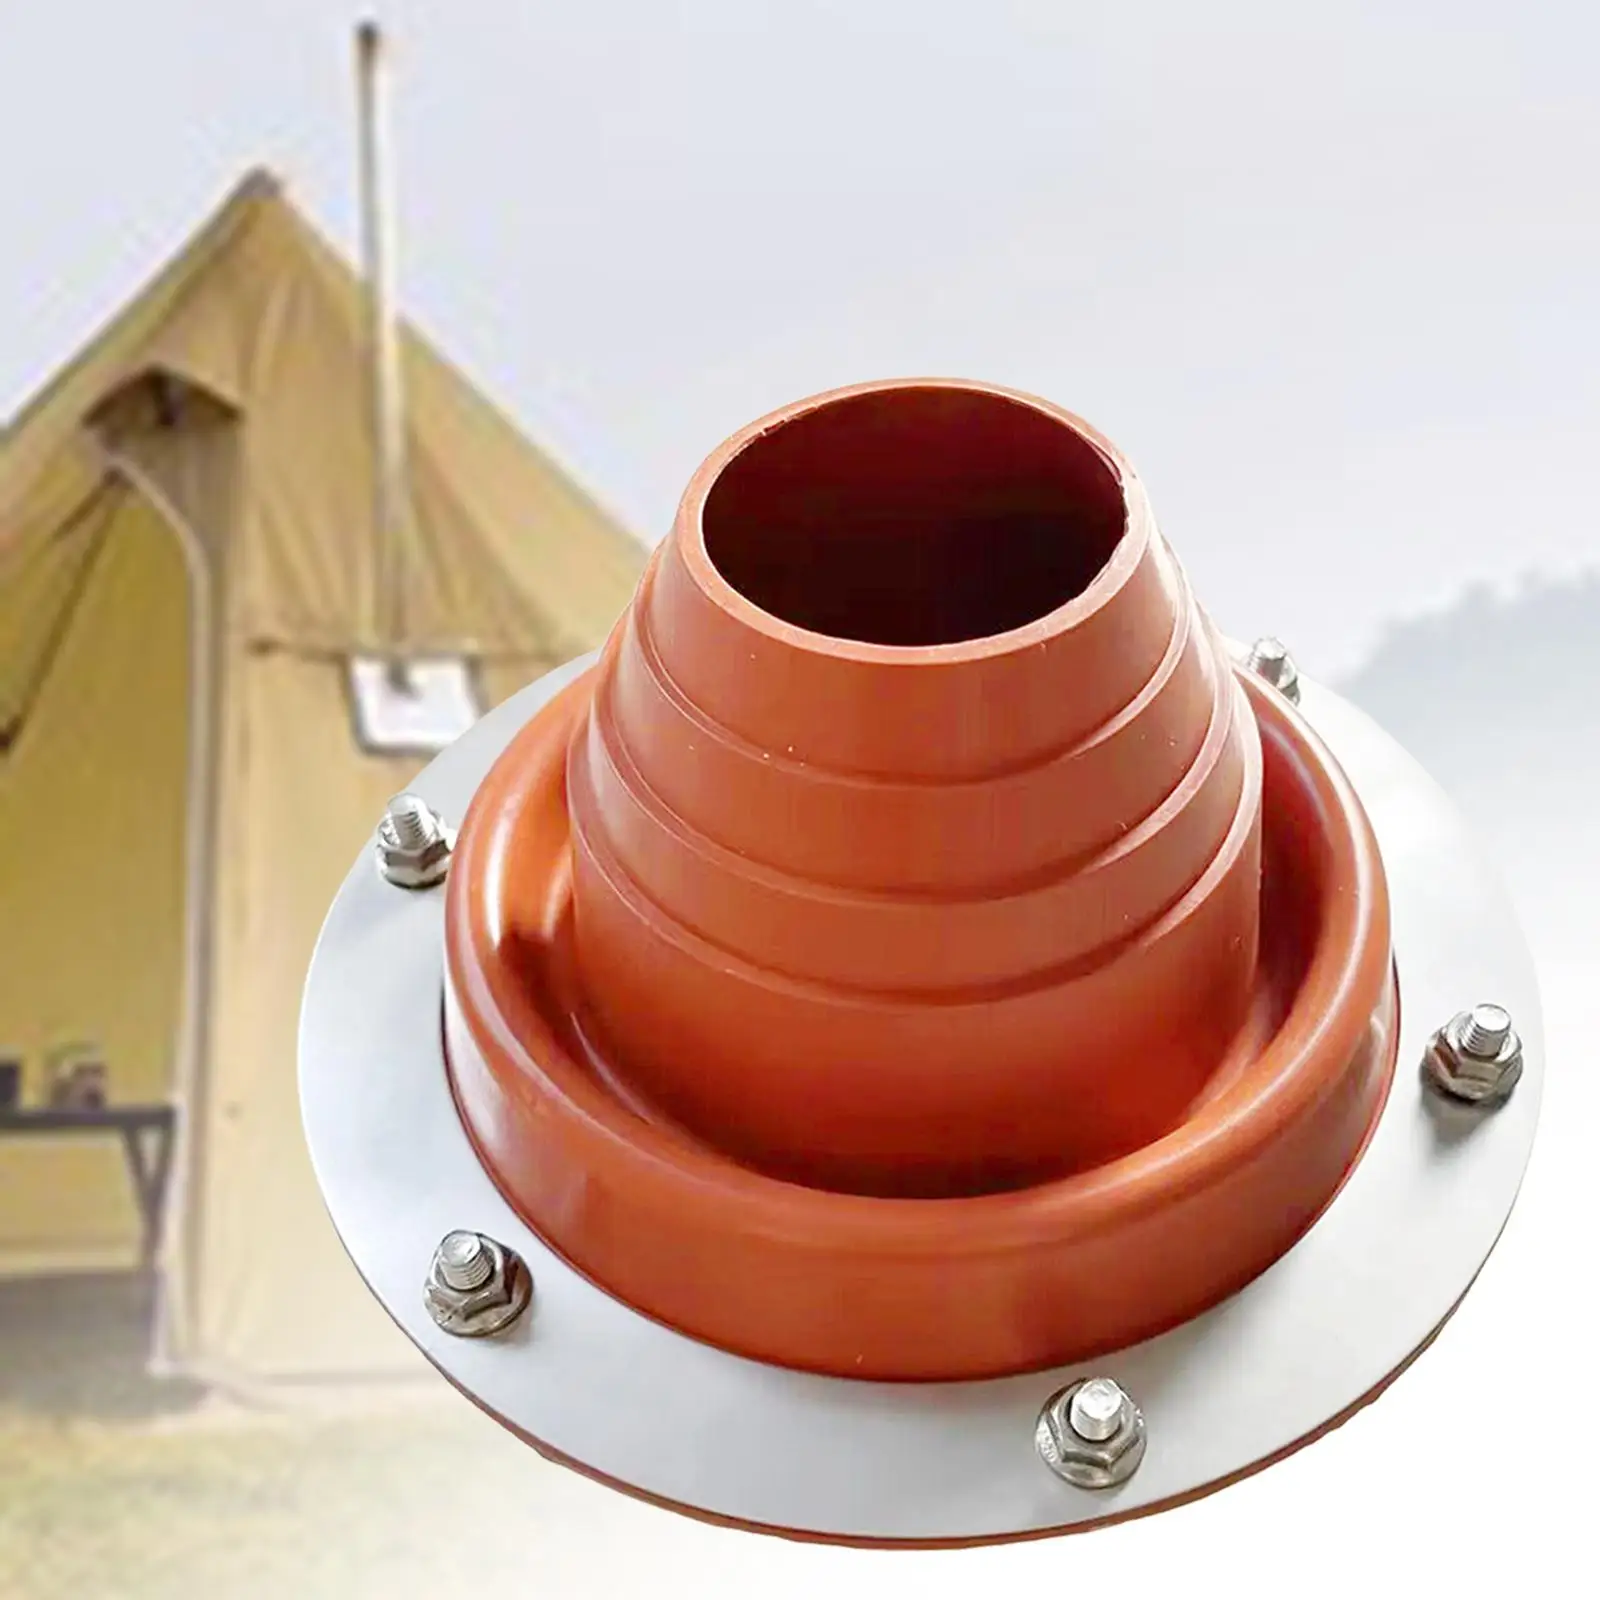 Hot Tent Jack Flue Flashing Kit for Chimney Camping Accessories Tents Accessory